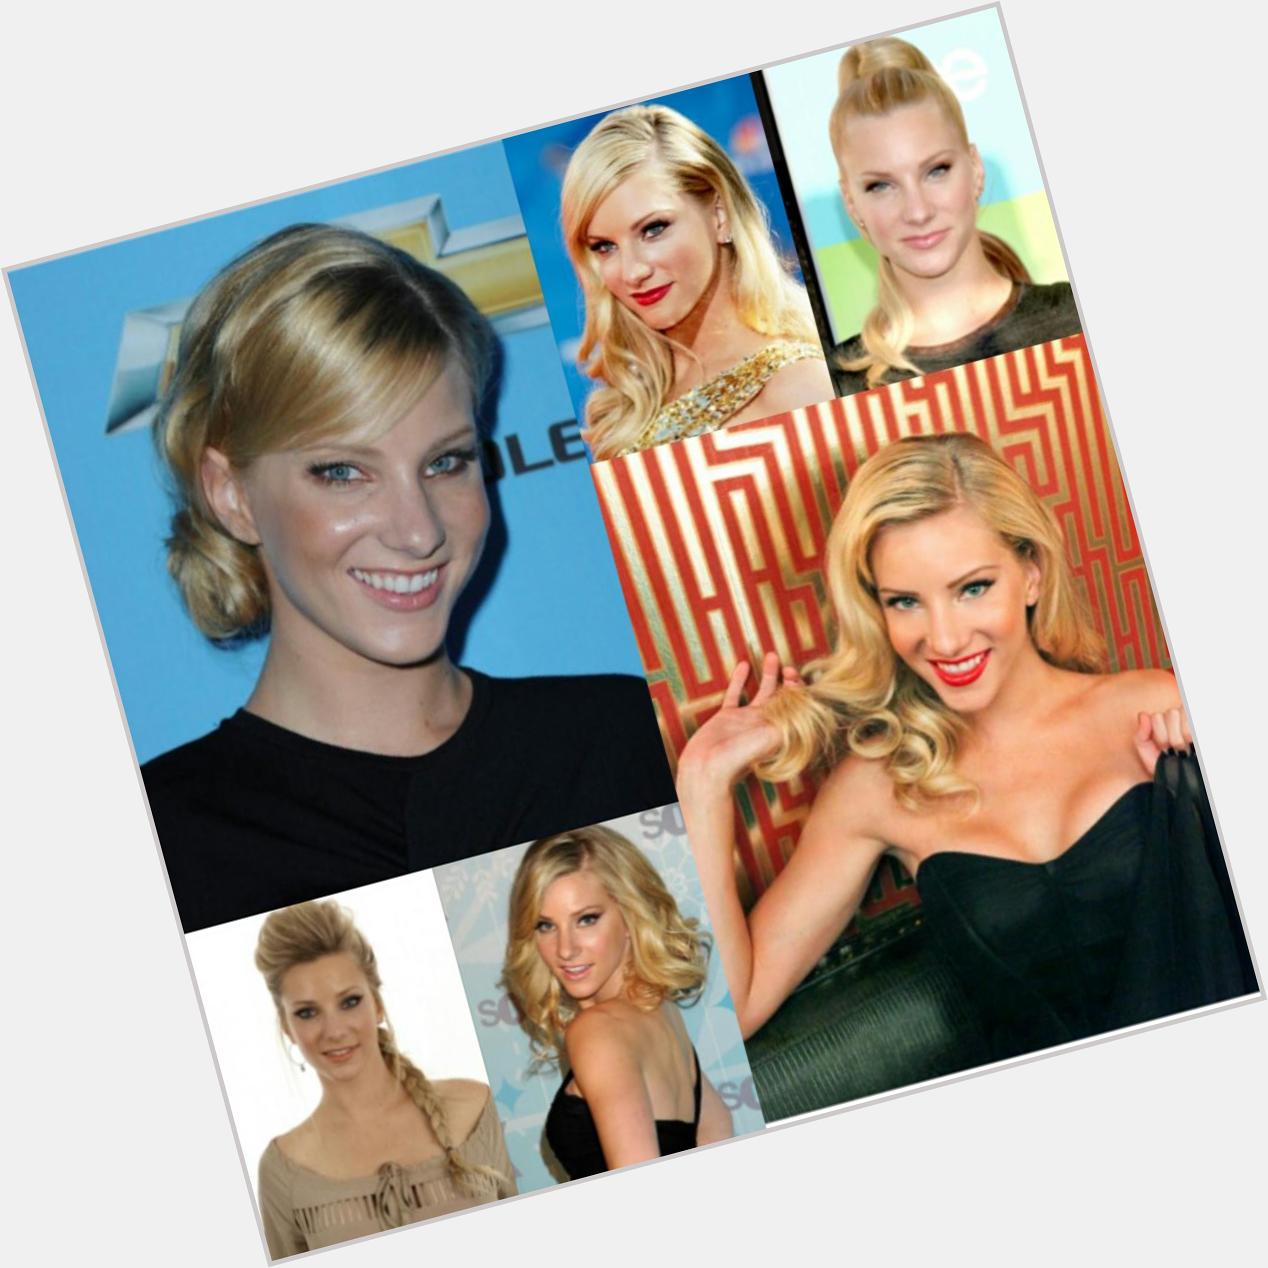 Happy birthday heather morris i hope you have a fantastic day , your so amazing and talented love u 